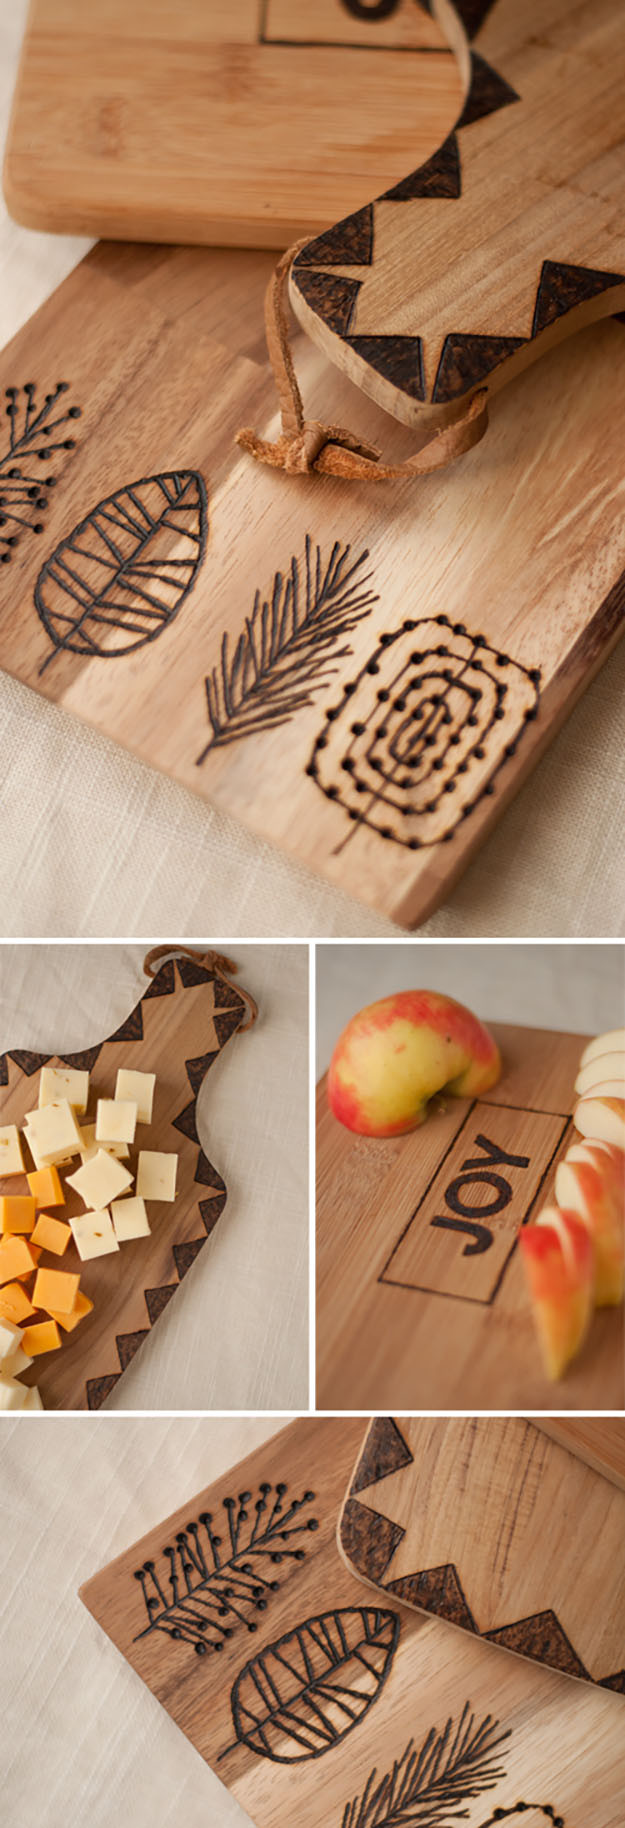 Wood Craft Gift Ideas
 Inexpensive DIY Gifts To Make For Christmas & Birthdays